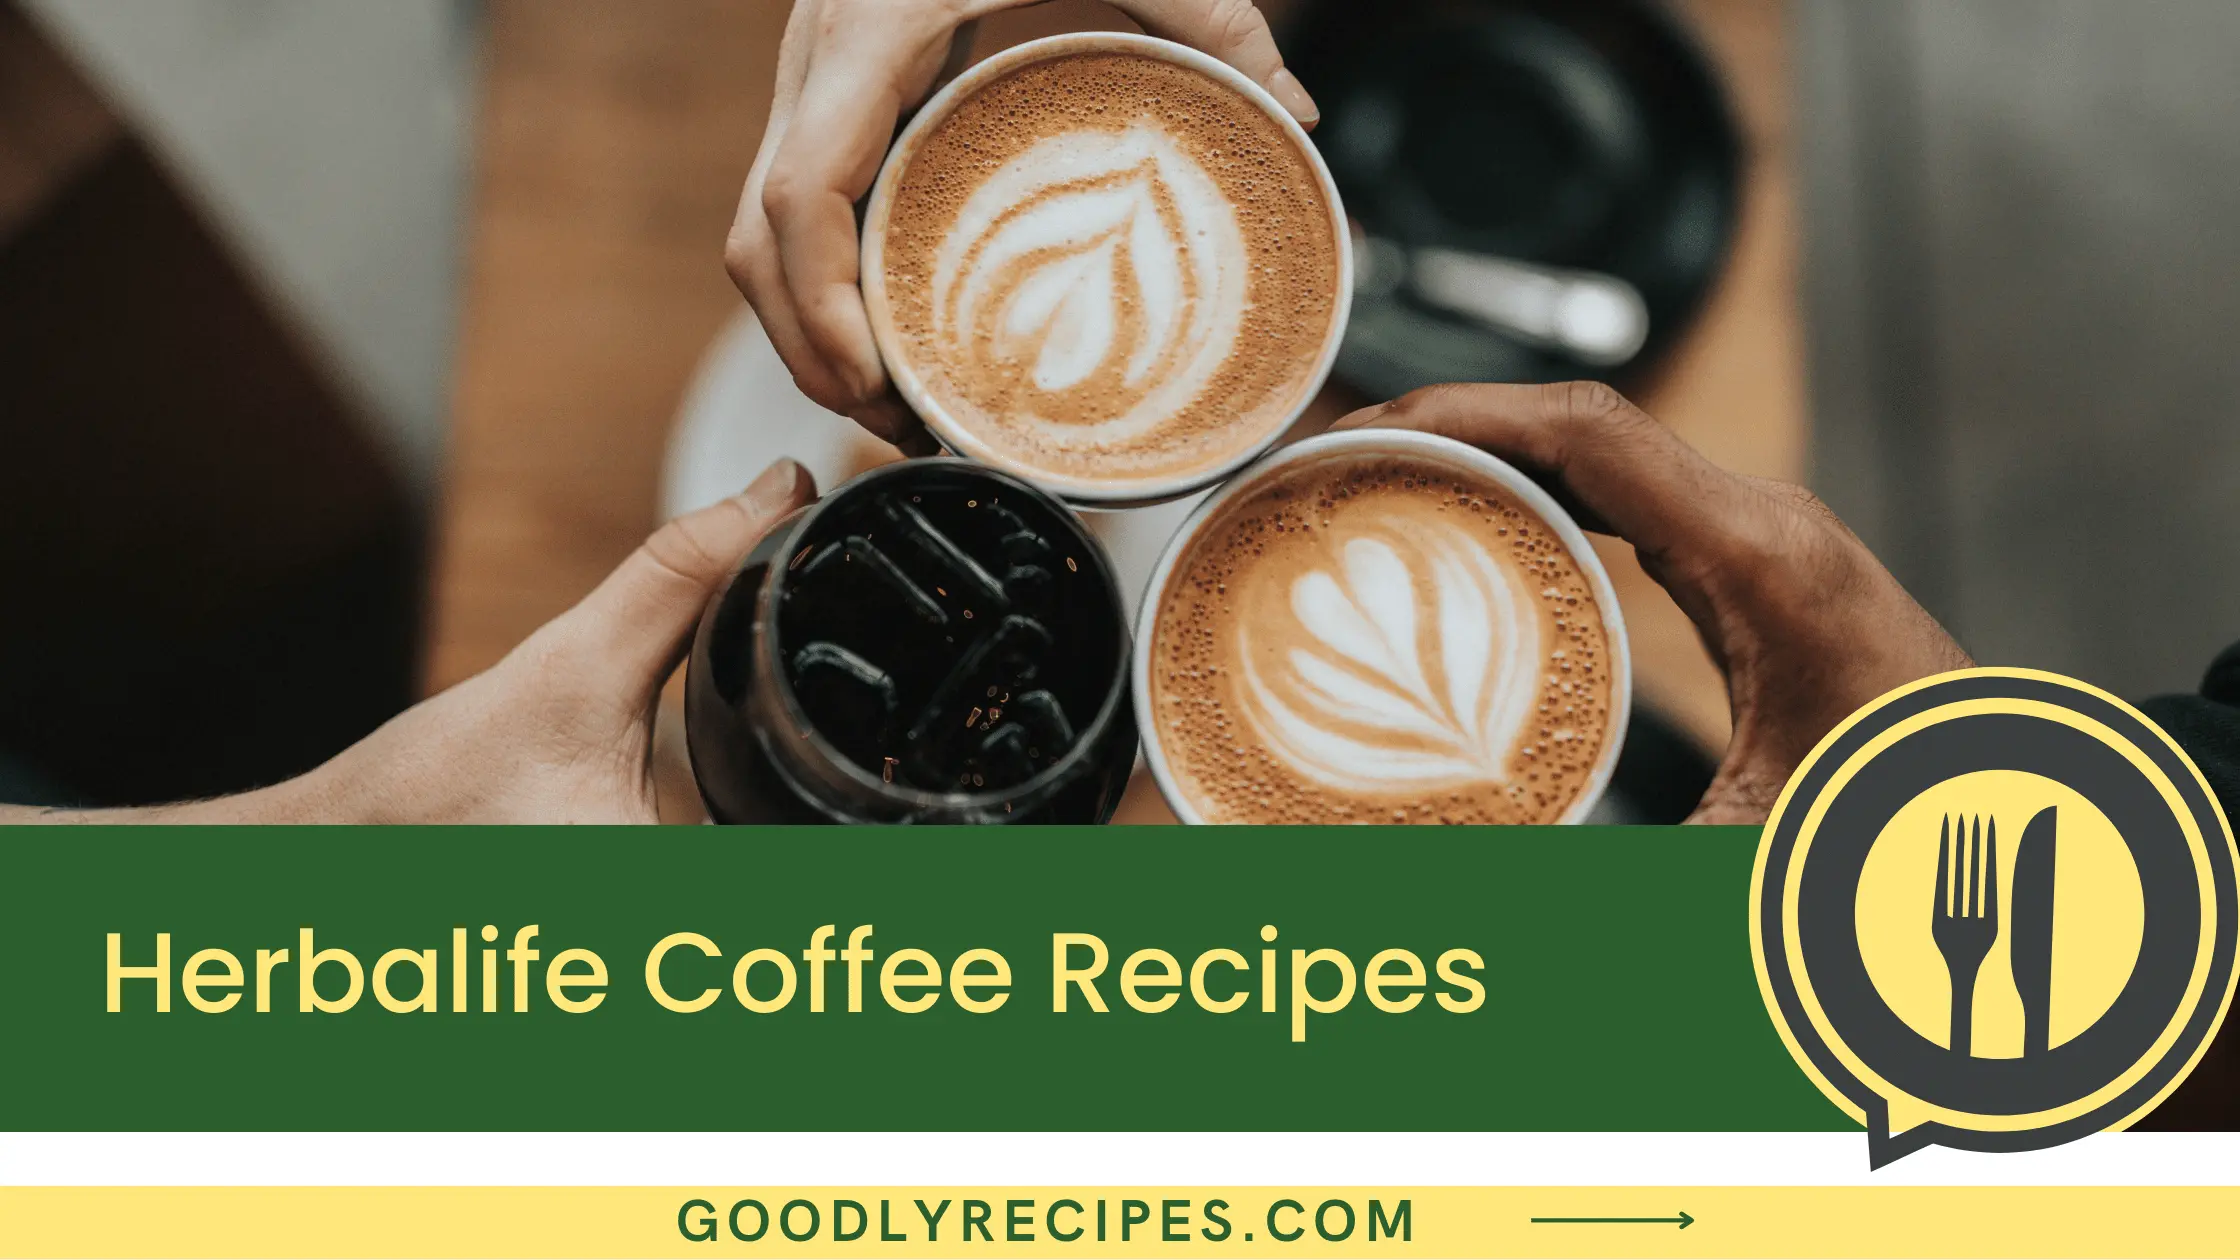 What is Herbalife Coffee Recipes?